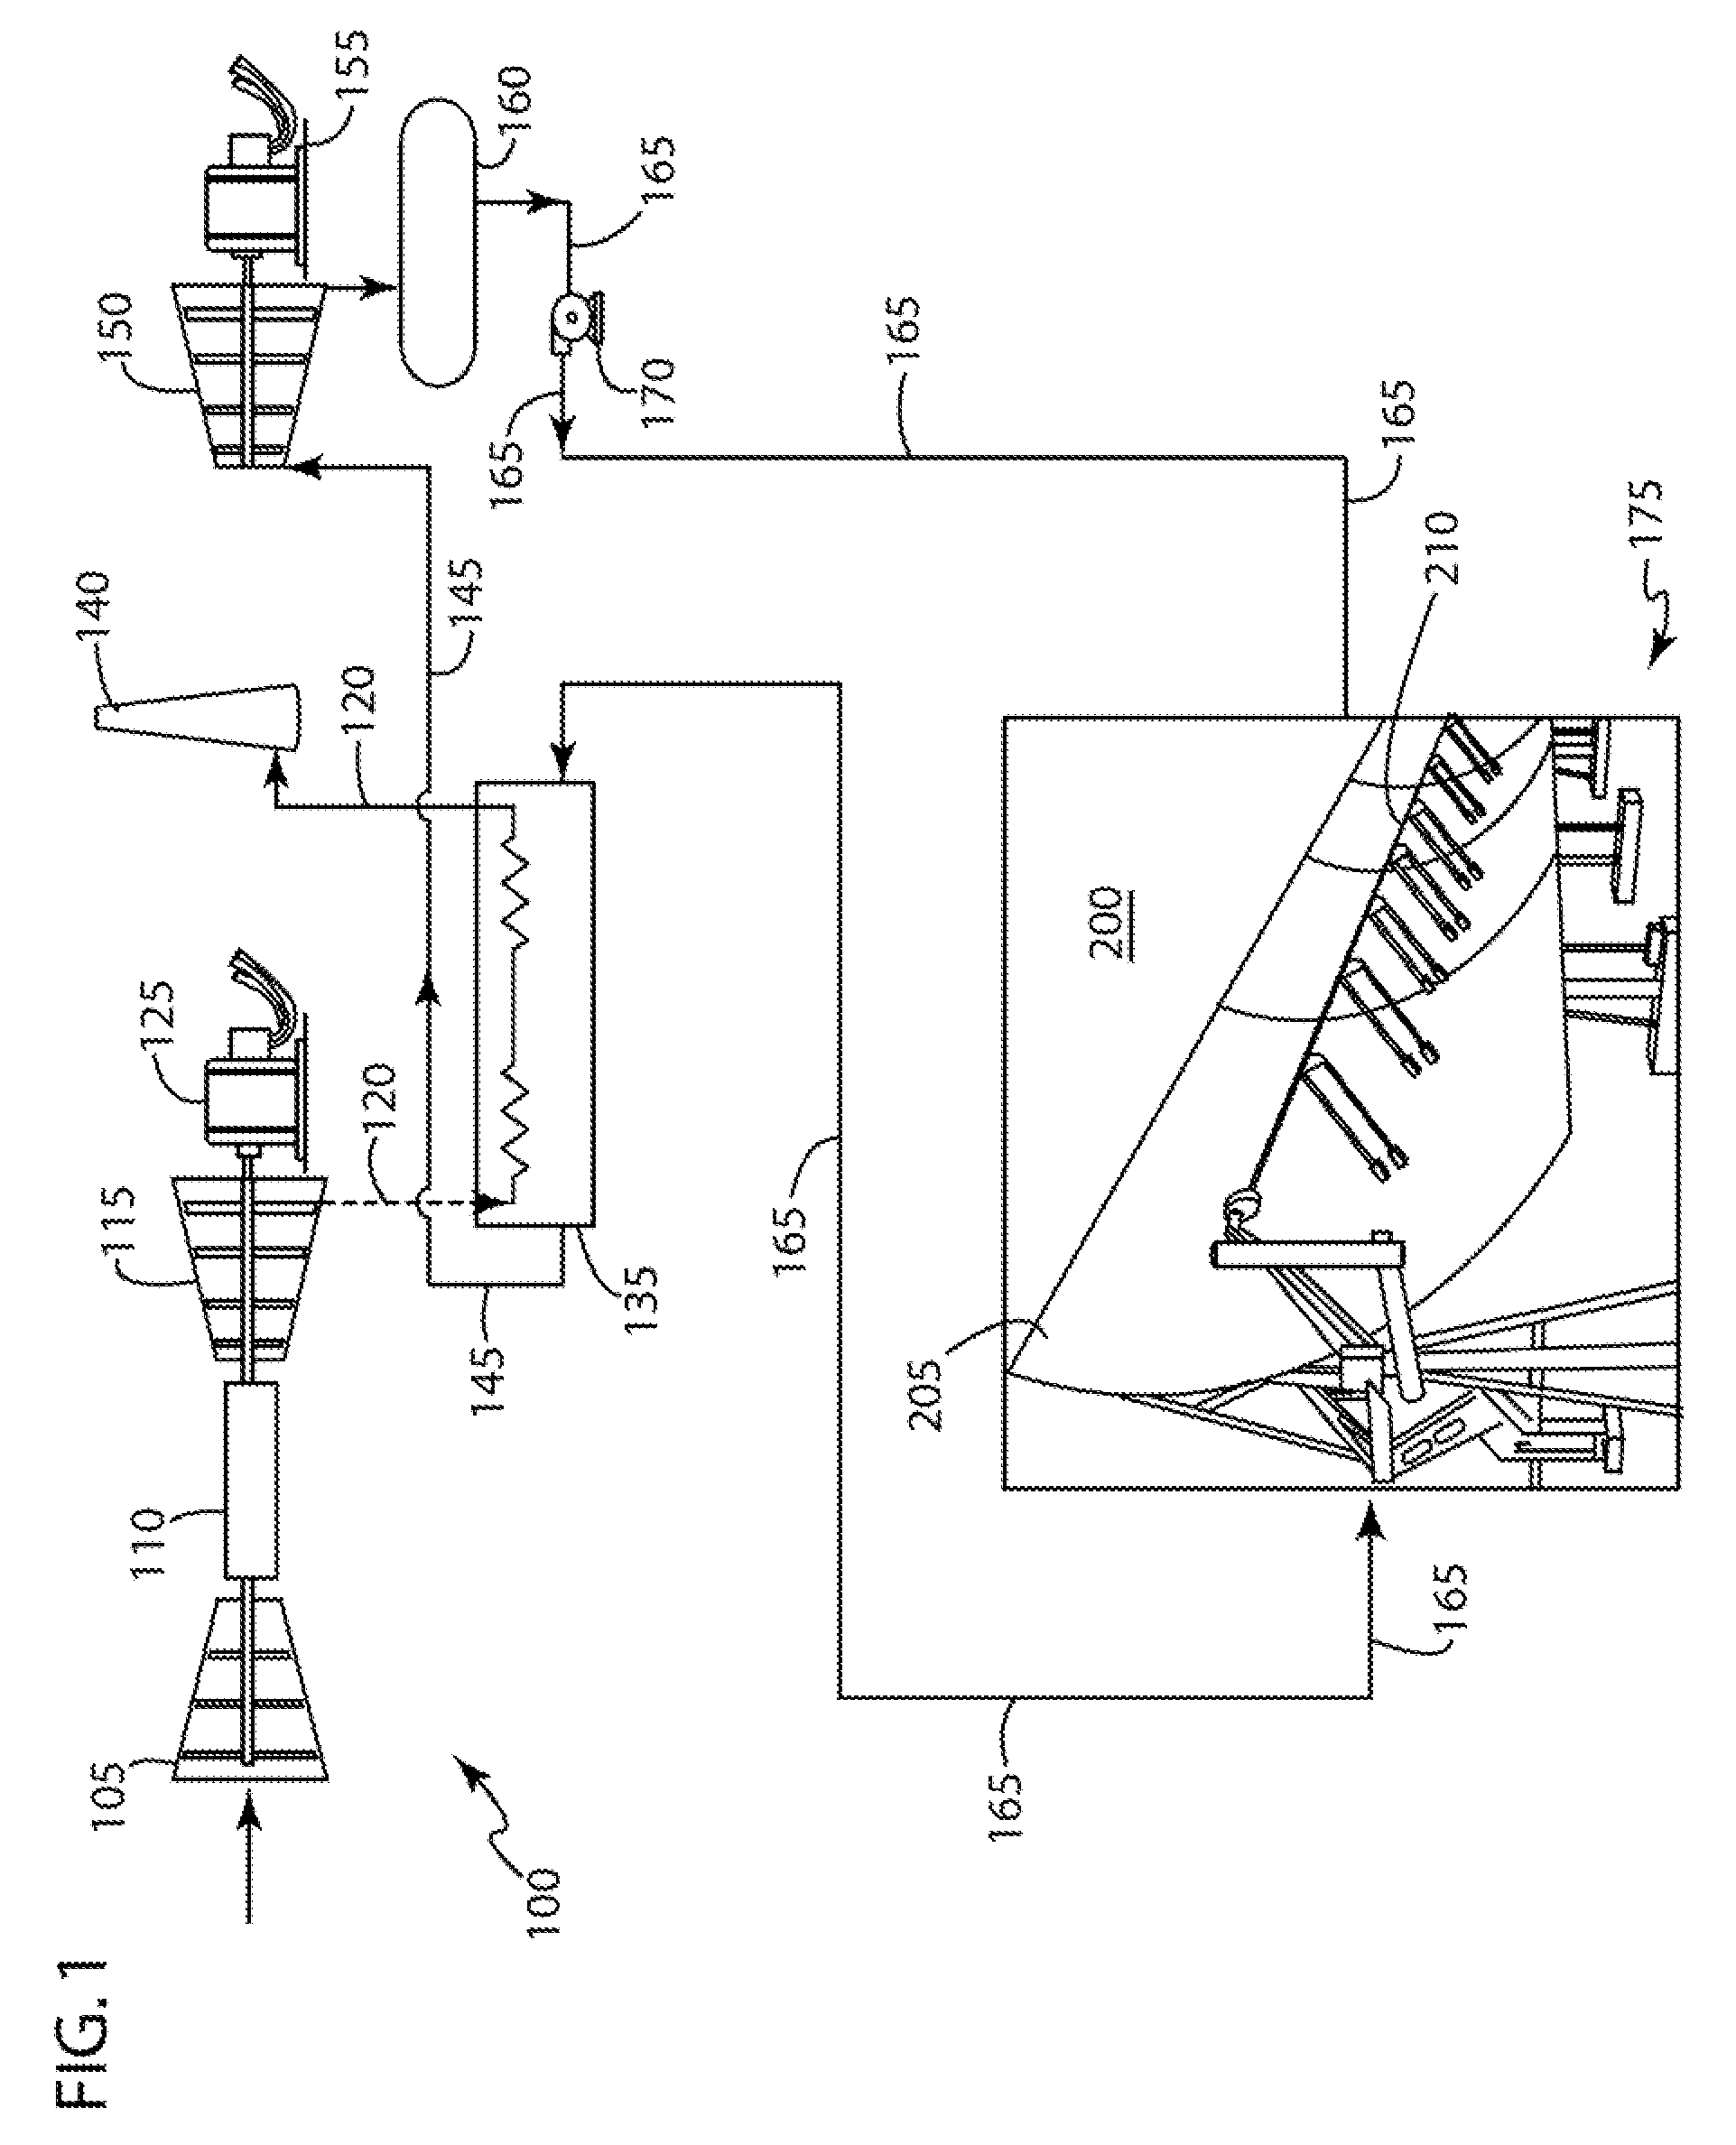 System and method for heating feedwater using a solar heating system